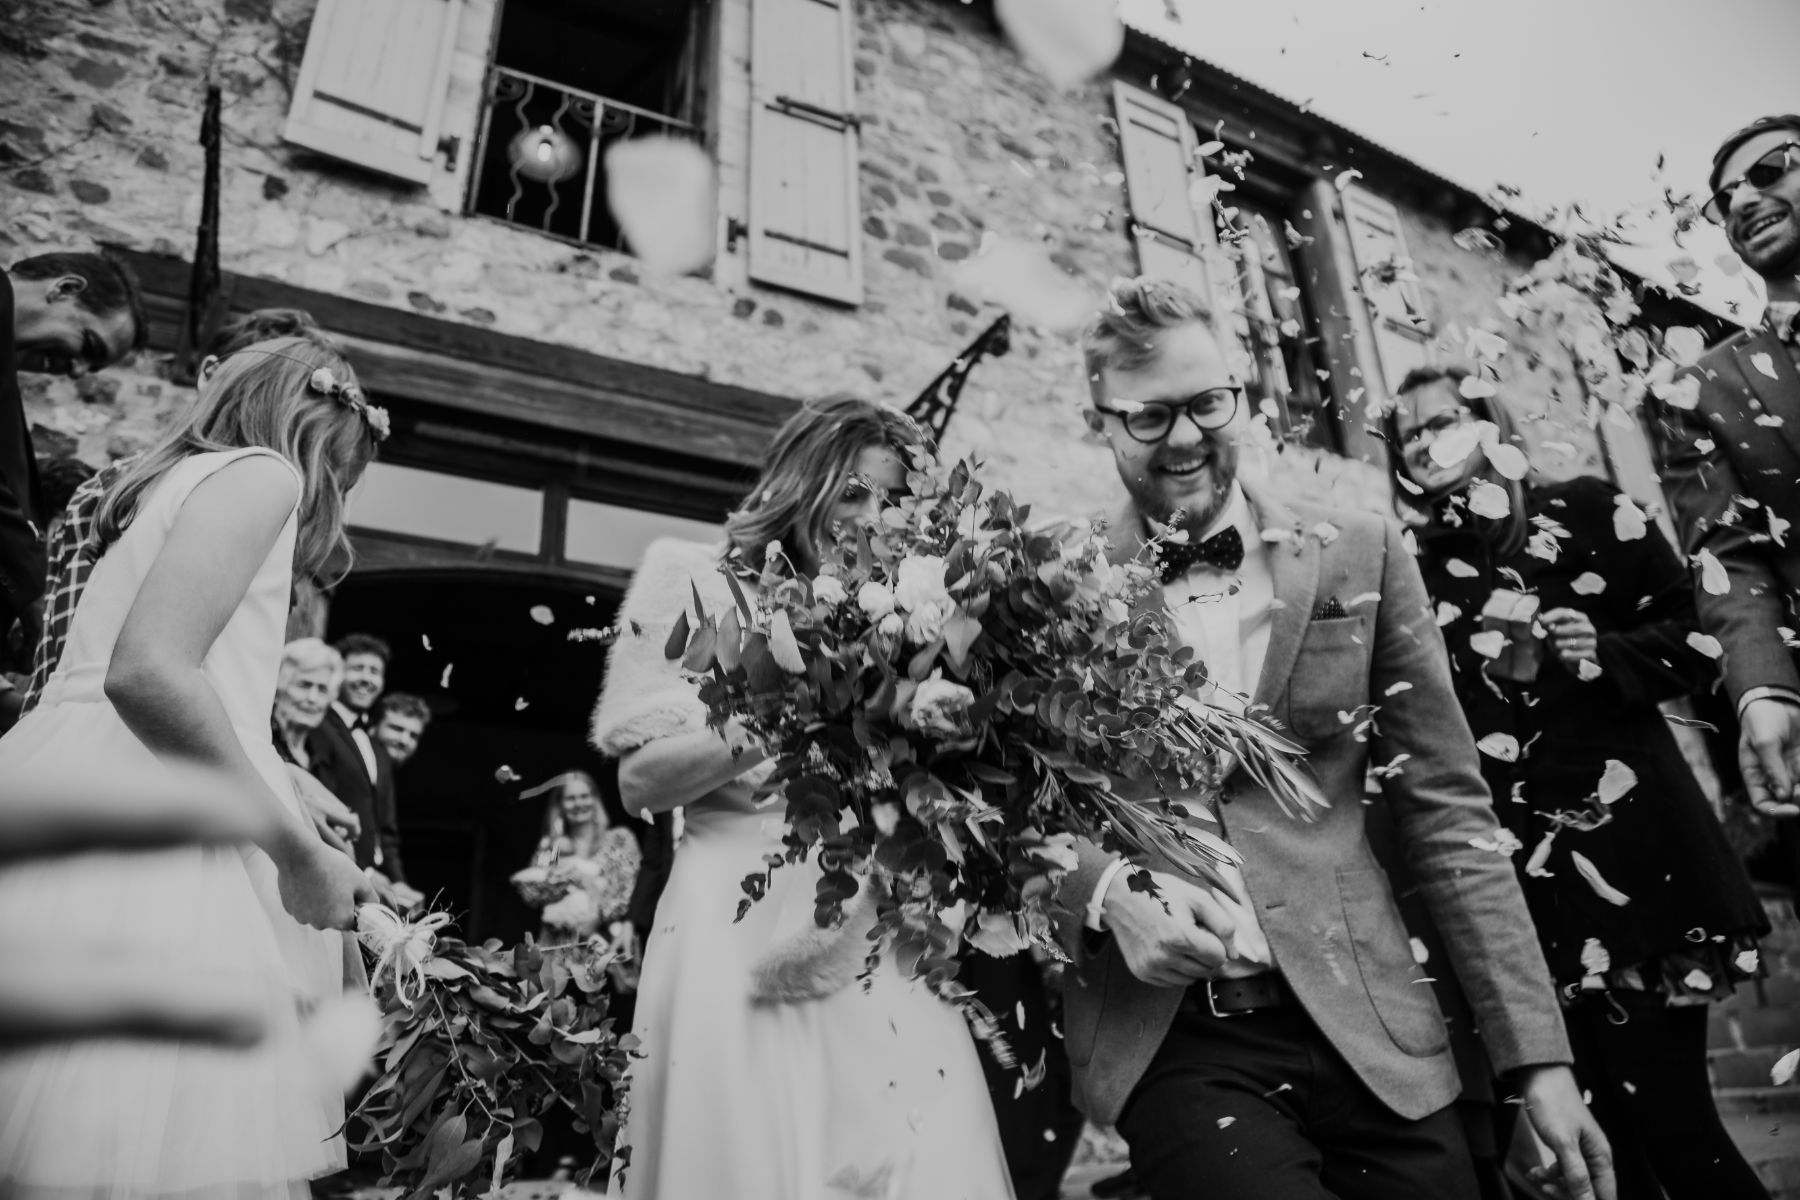 Blurry black and white wedding image of trendy couple emerging from wedding venue whilst being showered with confetti